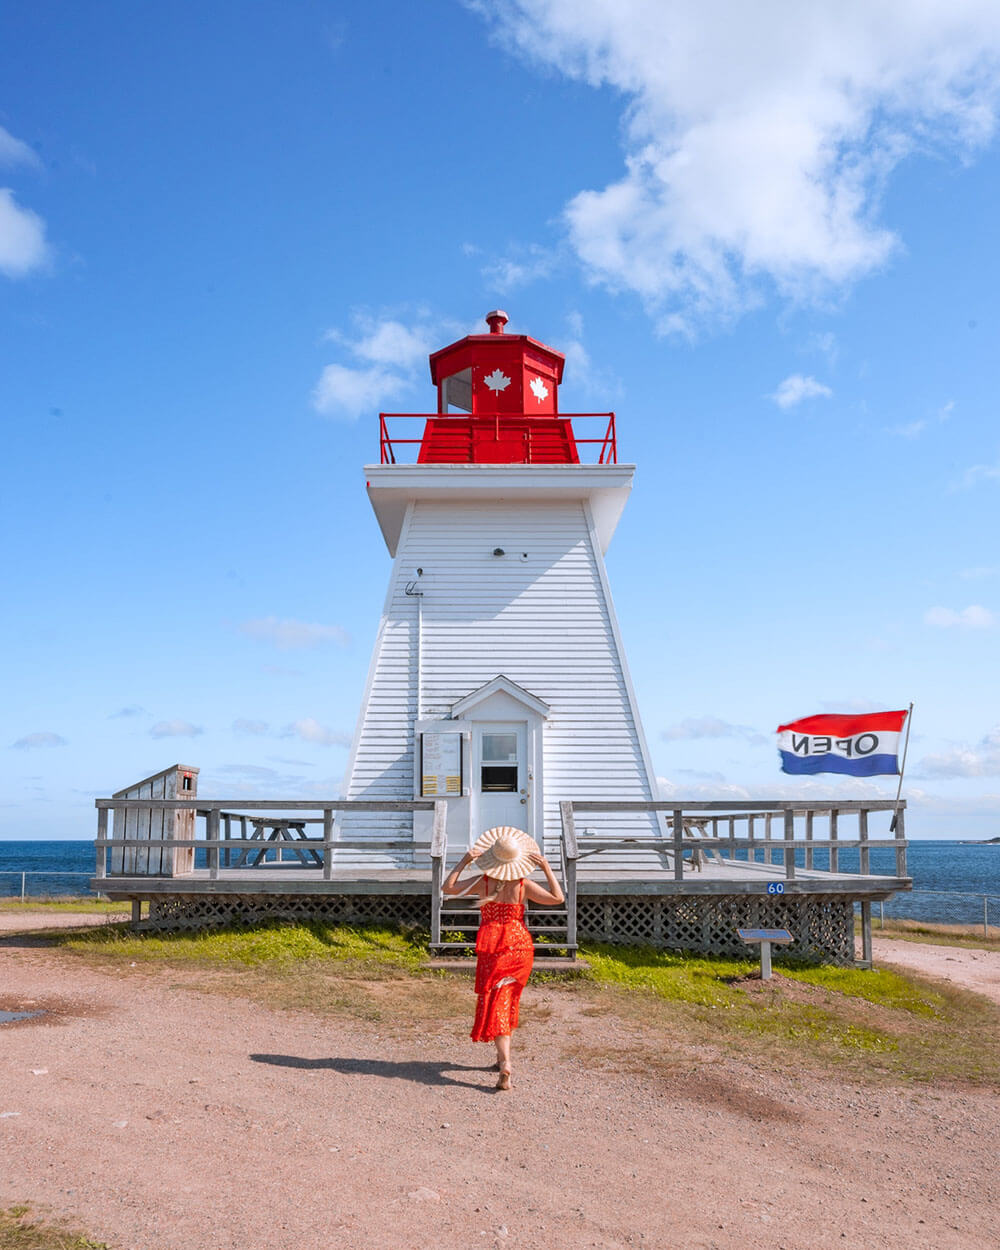 Planning a trip to Cape Breton soon? Don't miss this guide to the best restaurants along the Cabot Trail! This guide is chock full of the best restaurants in Cape Breton from local favourites, seafood joints, cafes, dessert spots, and more. This guide will definitely help you figure out where to eat in Cape Breton! Pictured here: Neil's Harbour Lighthouse